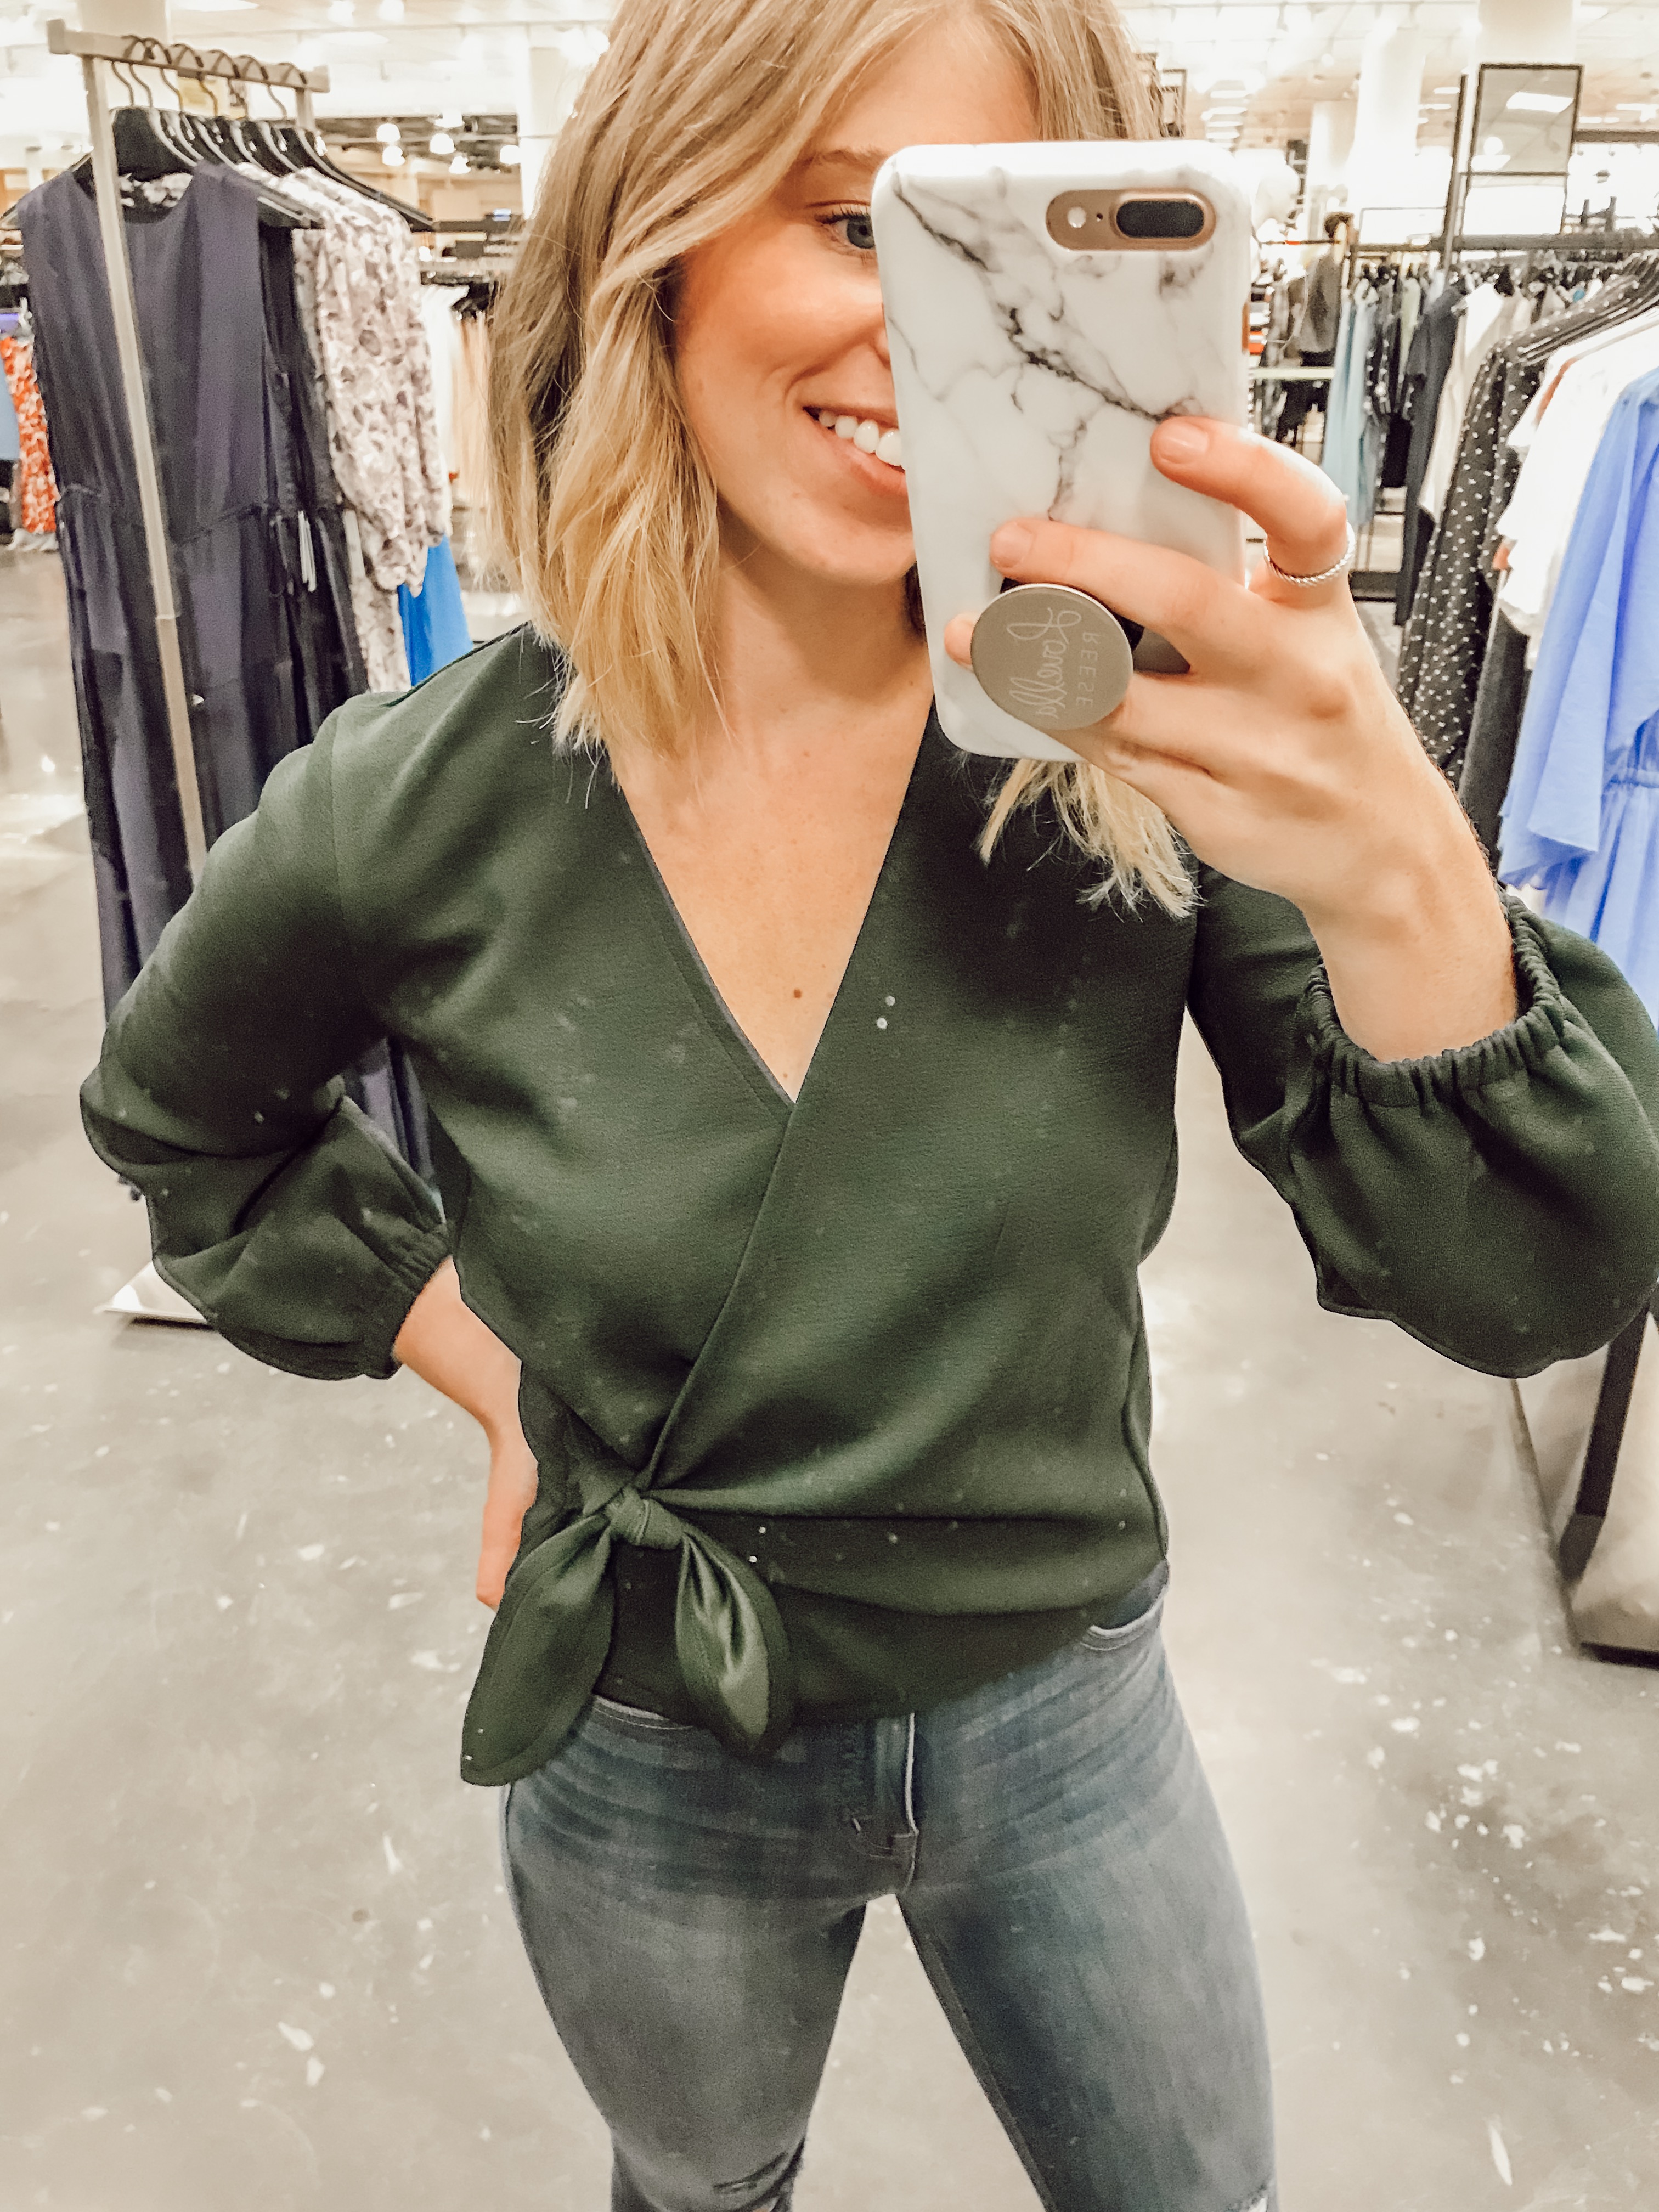 Madewell Wrap Top | 2019 Nordstrom Anniversary Fitting Room Session featured on Louella Reese Life & Style Blog